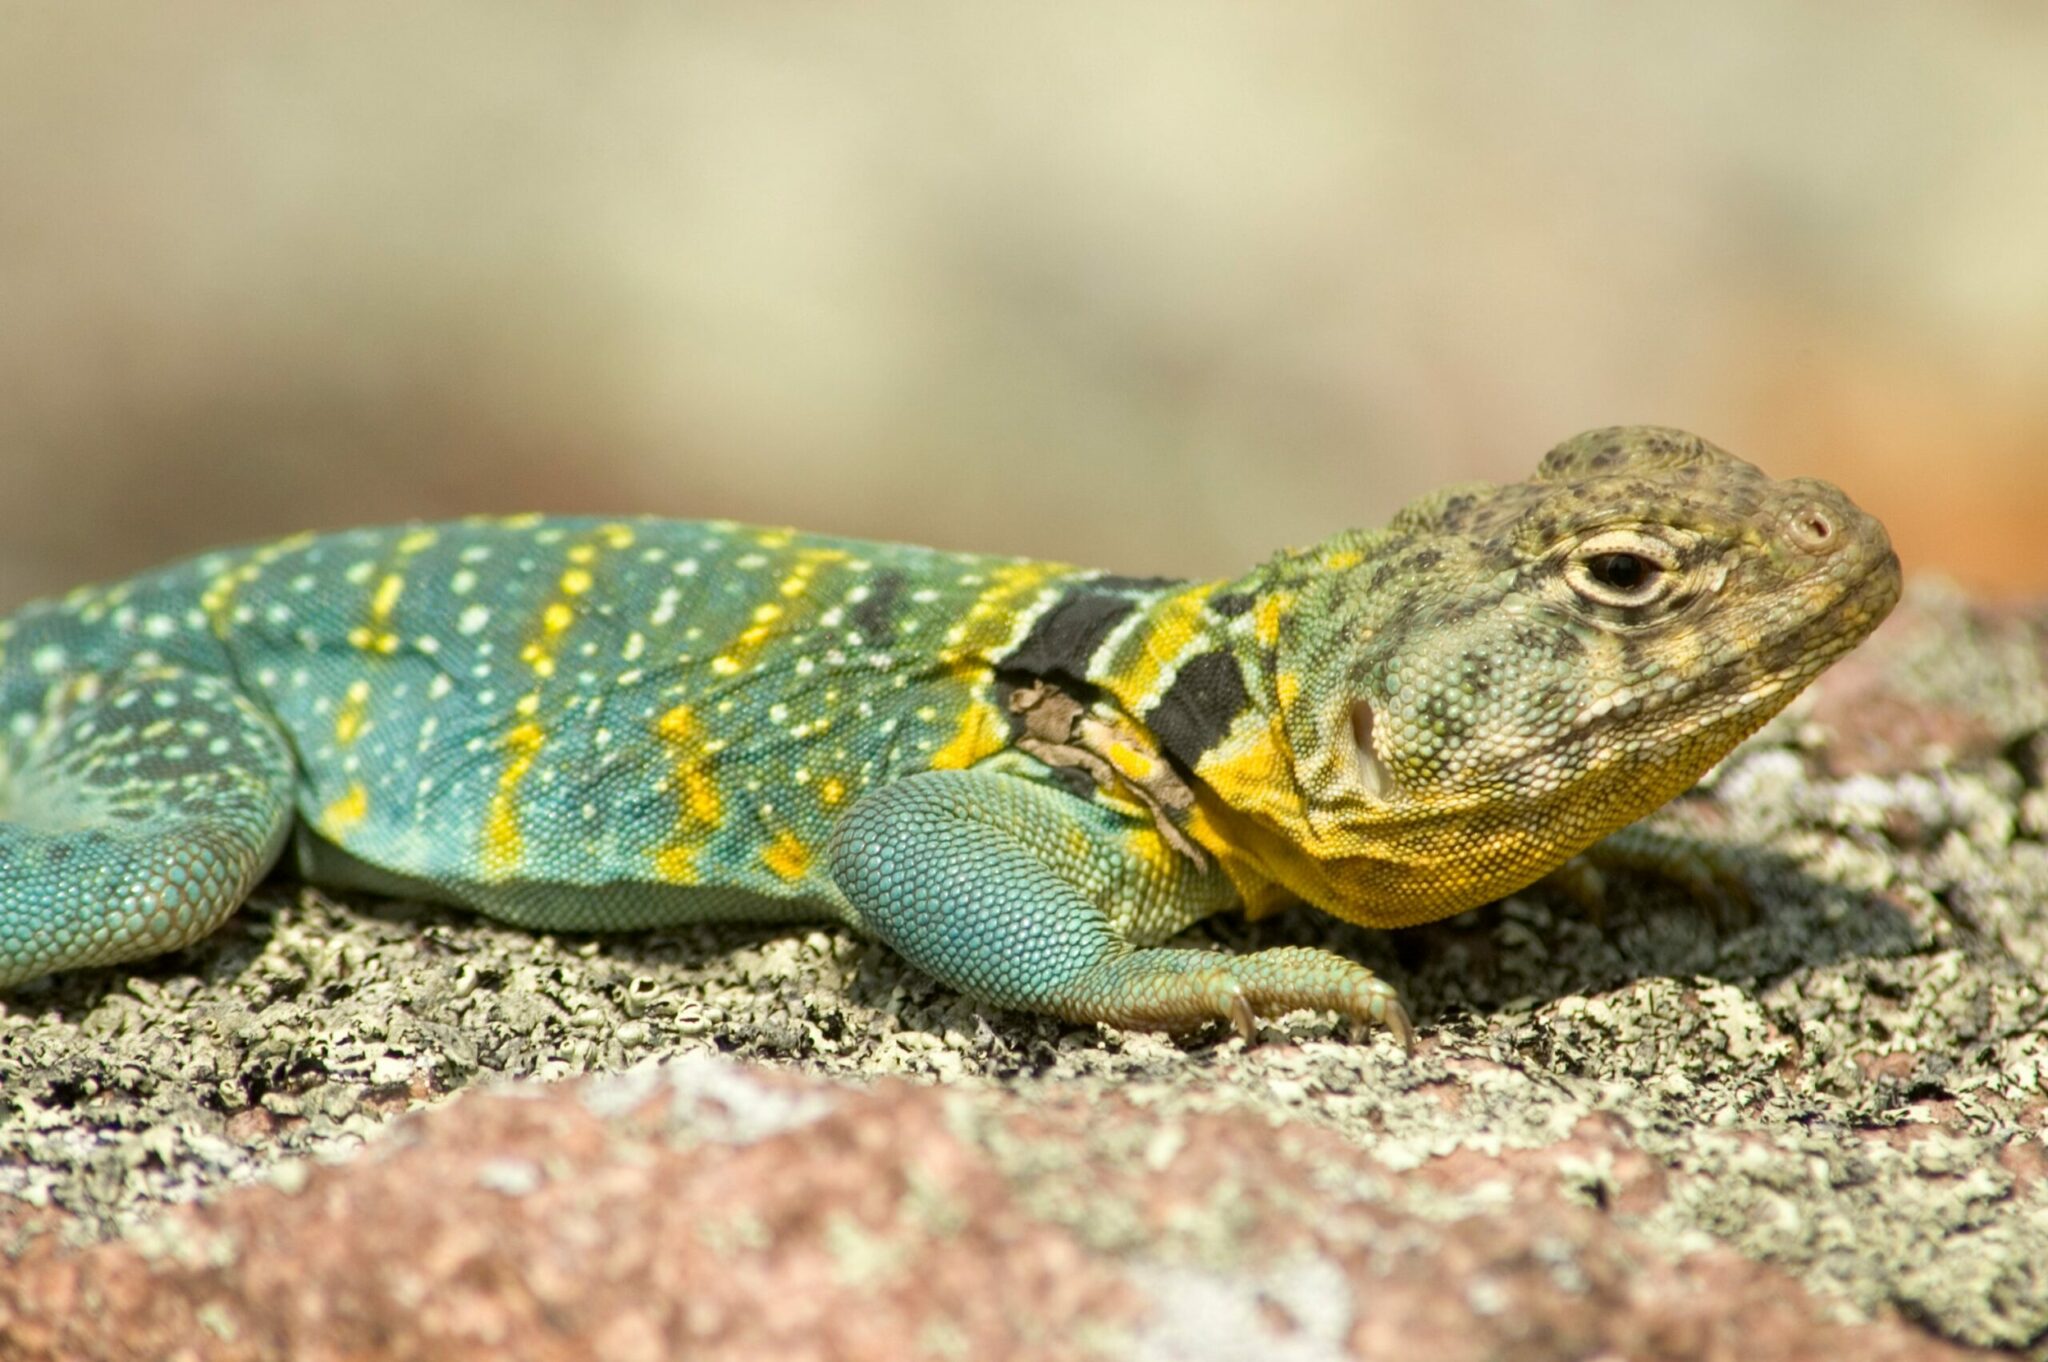 can a lizards tail grow back if it is broken off or bitten by a predator scaled